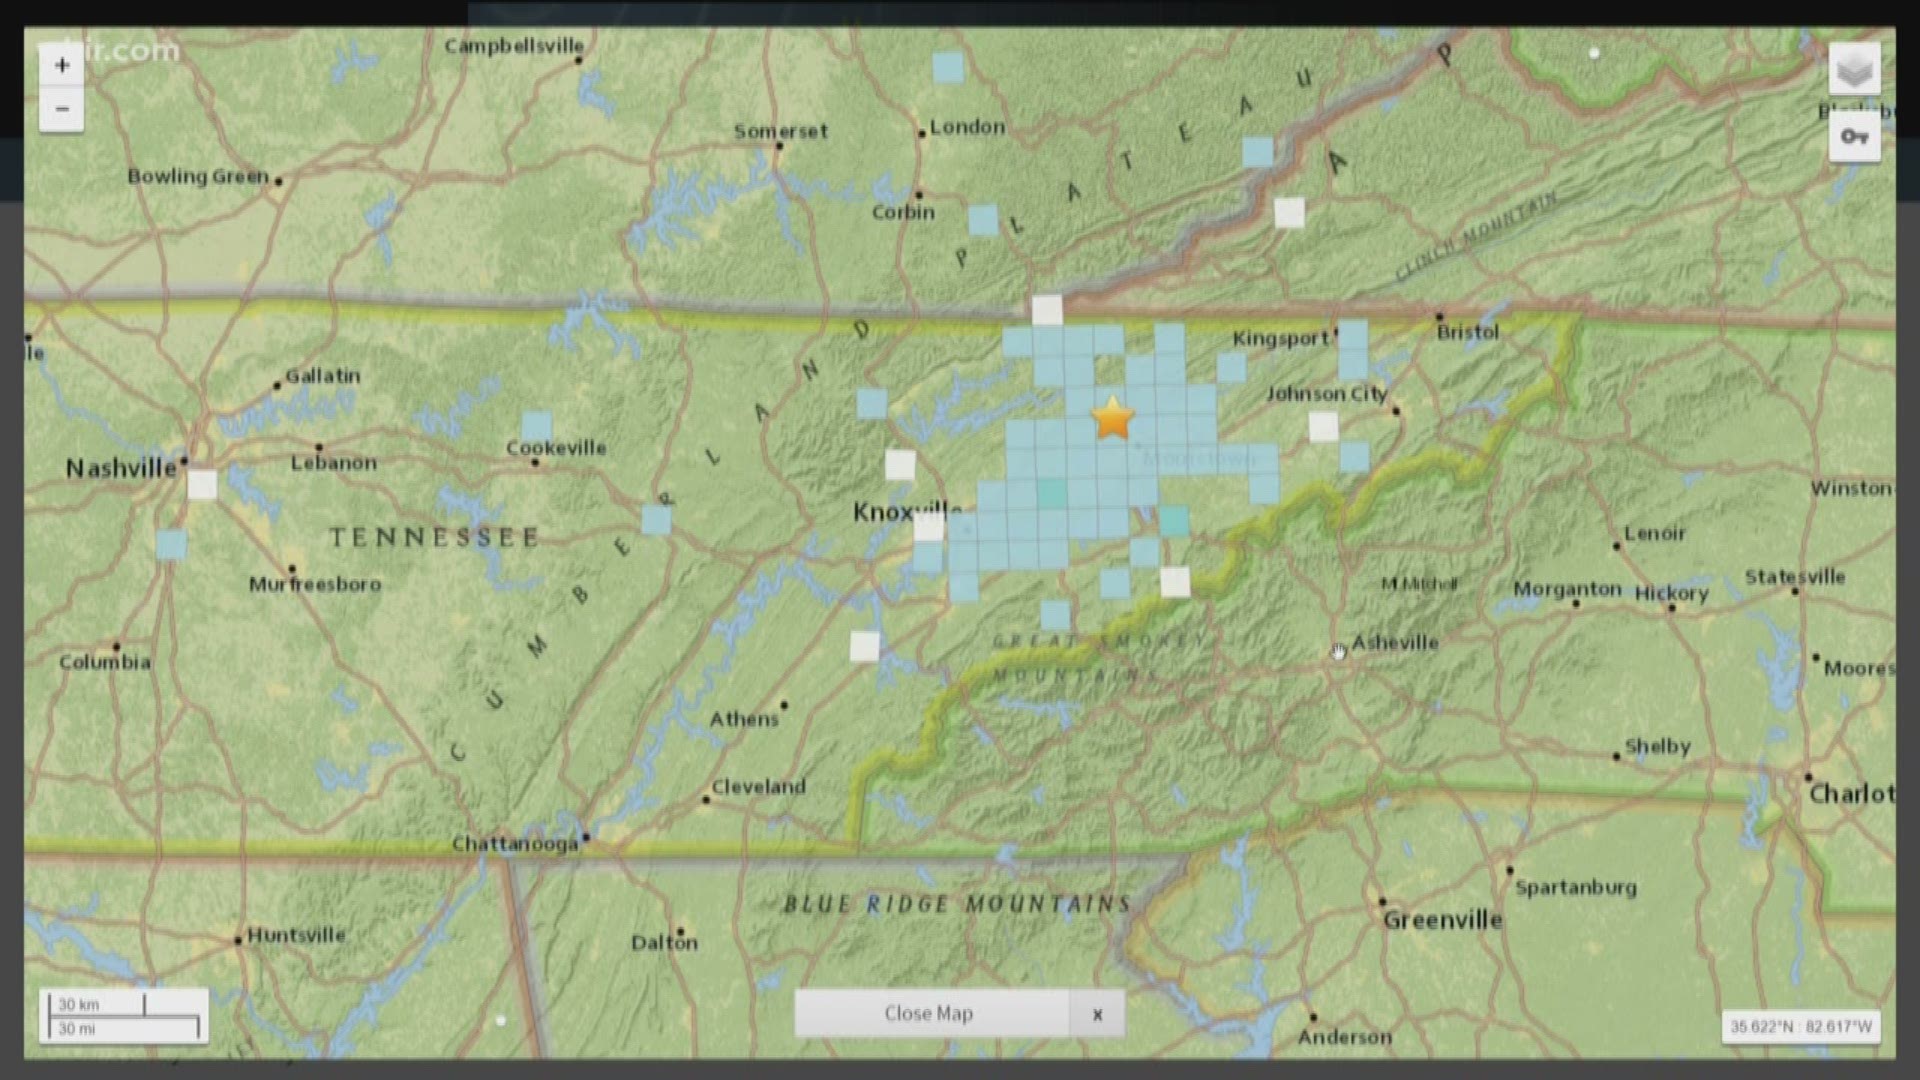 East Tennessee is in active seismic zone, and small earthquakes, usually a magnitude 3 or below, are not uncommon. Many of them are so small that people do not feel them.